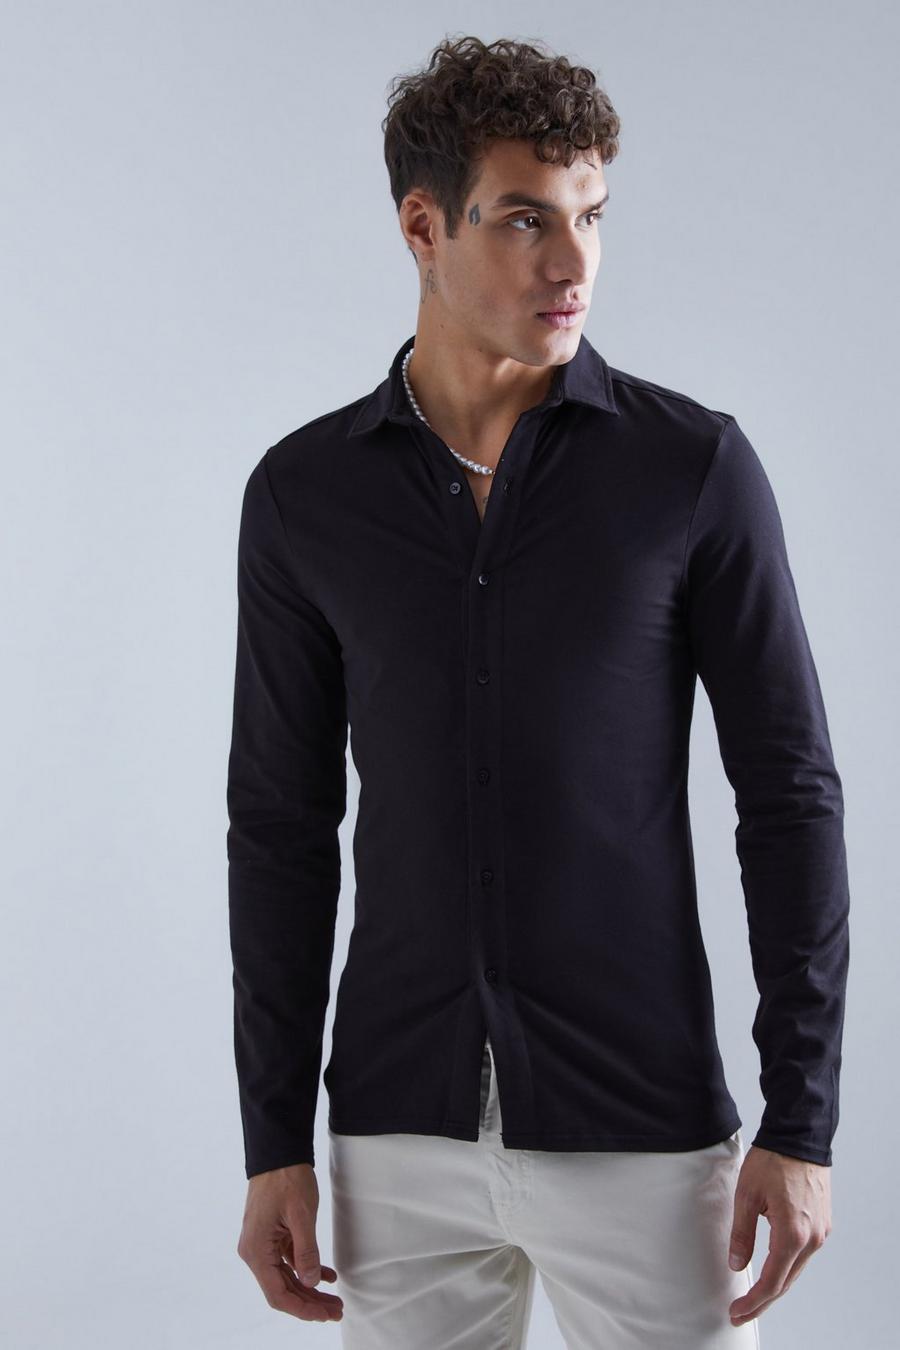 Black Long Sleeve Muscle Fit Jersey Shirt